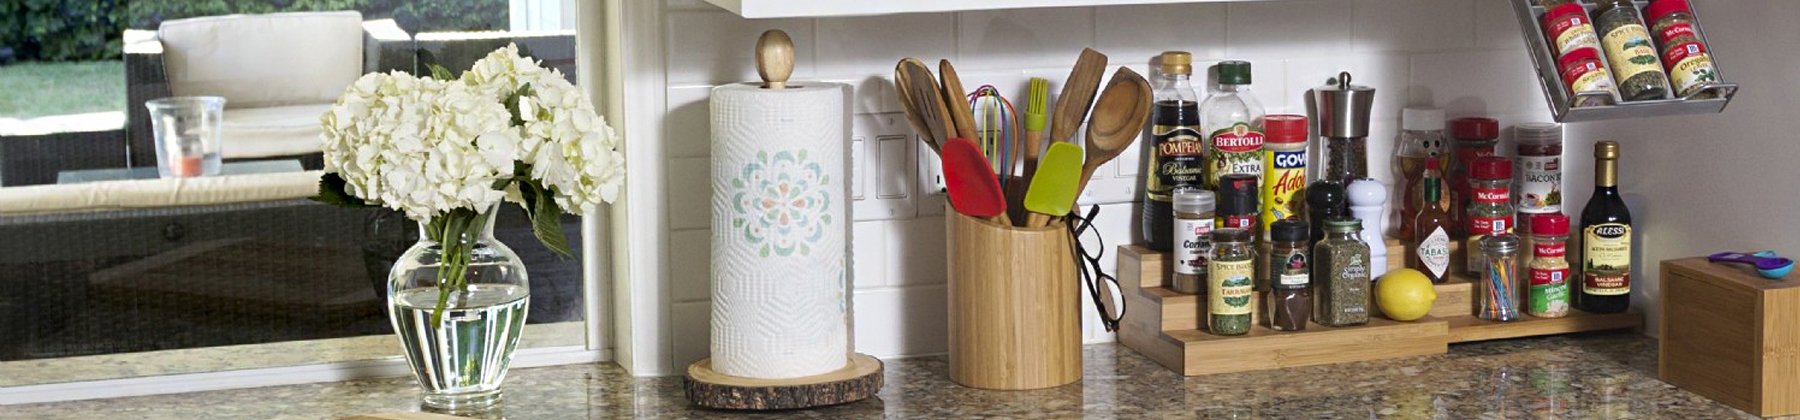 Photo of Lipper bamboo organizing products on a kitchen countertop.